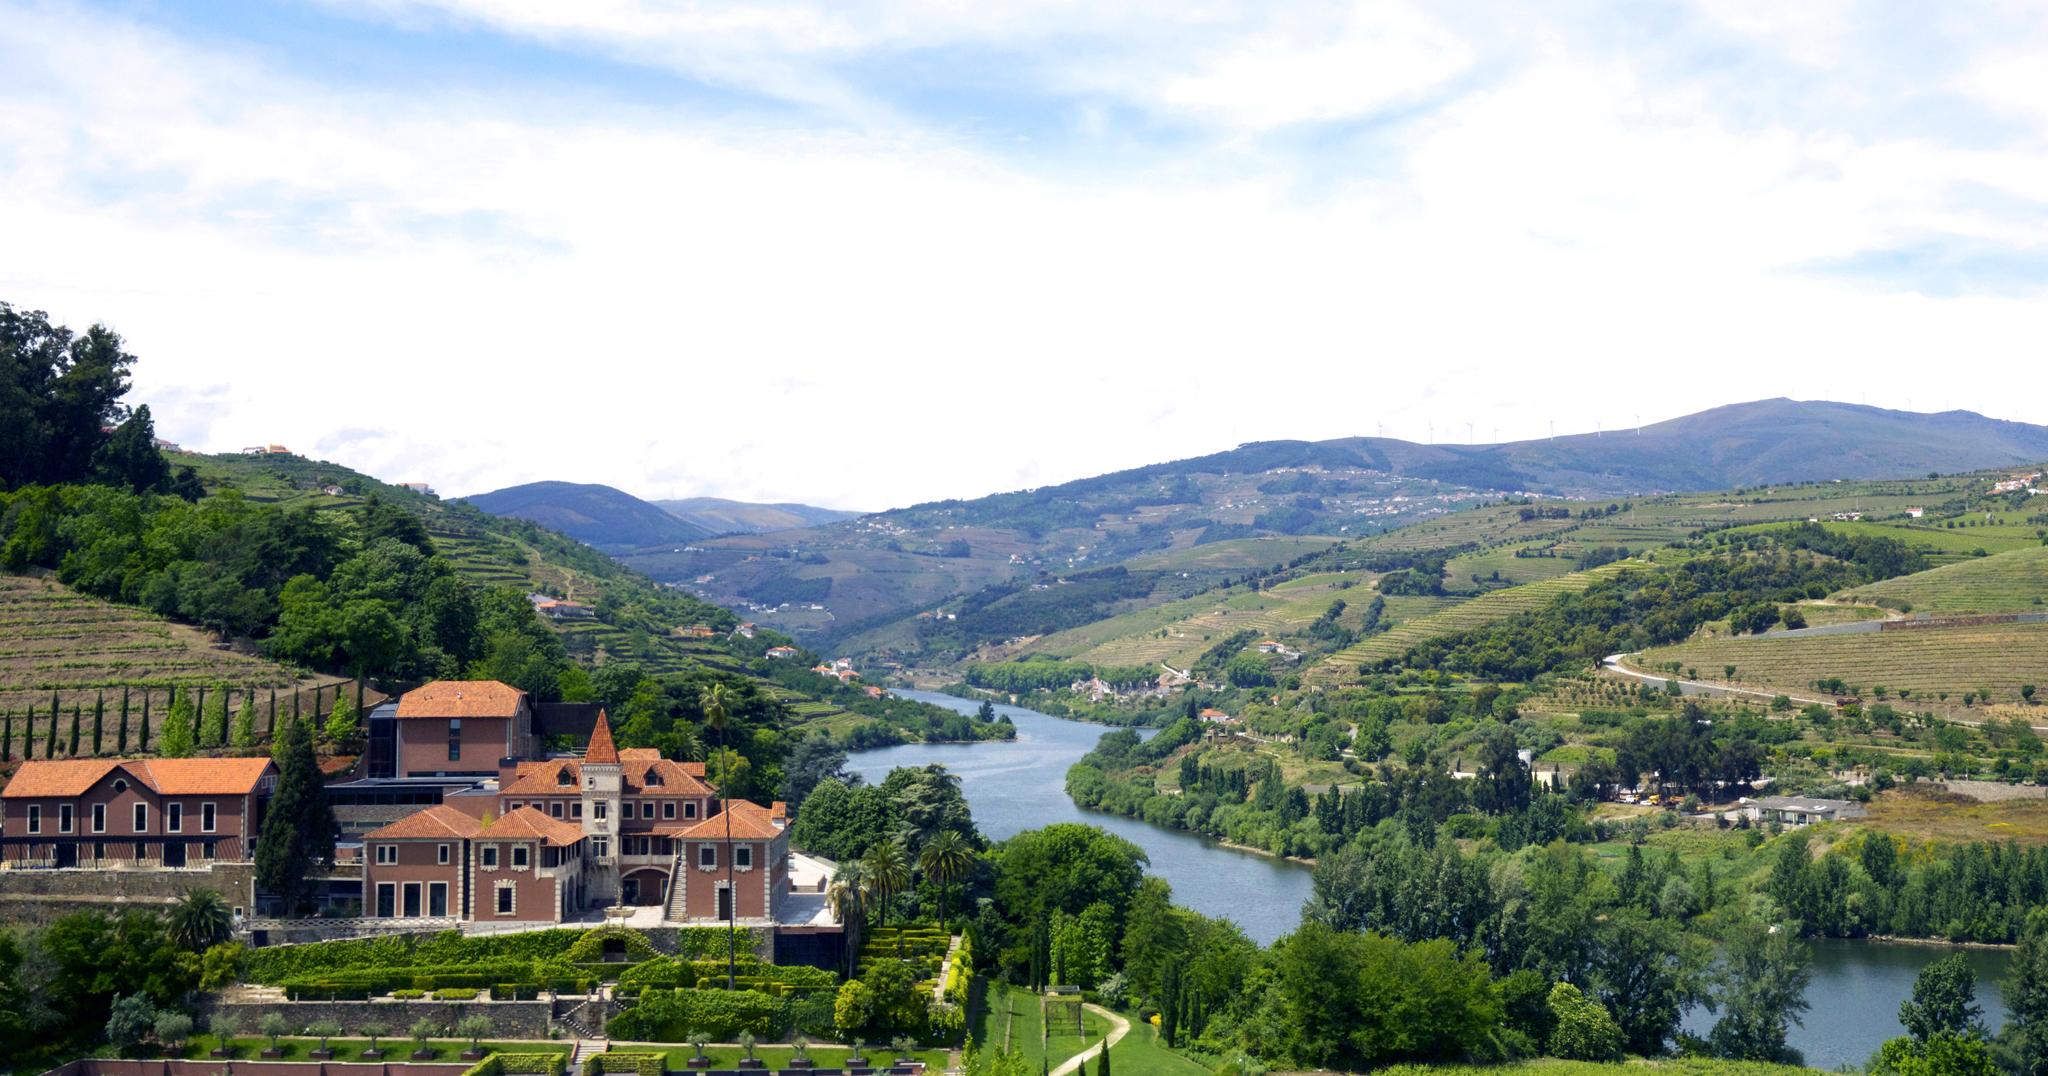 Six Senses, and the Douro Valley beyond